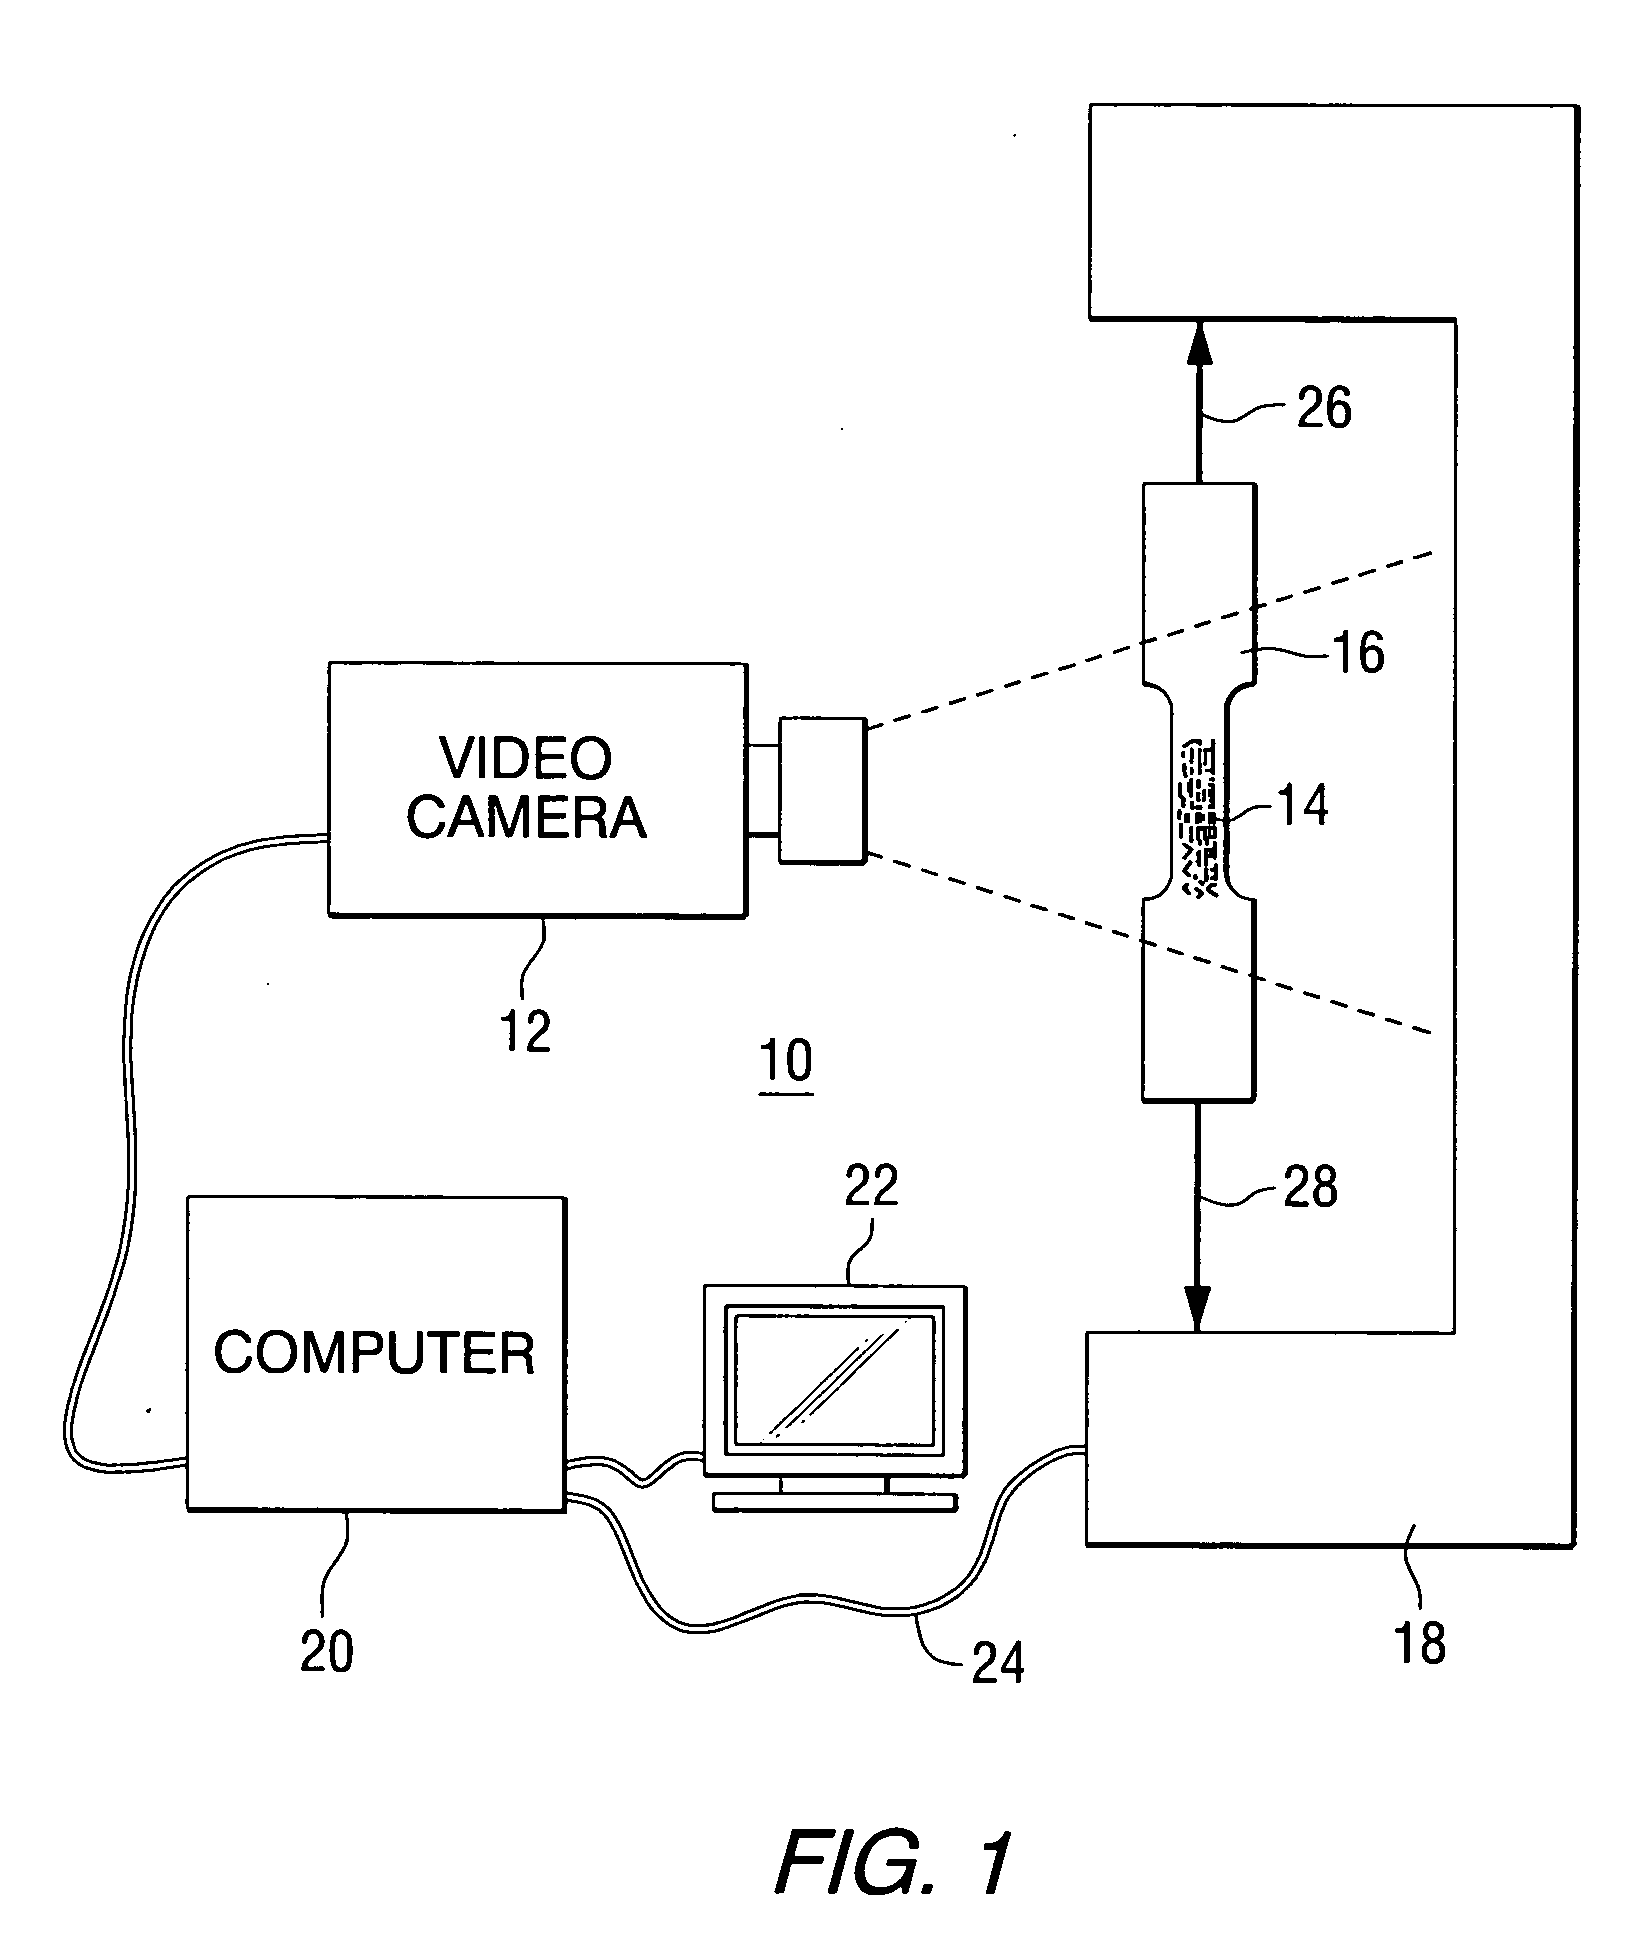 In-situ large area optical strain measurement using an encoded dot pattern